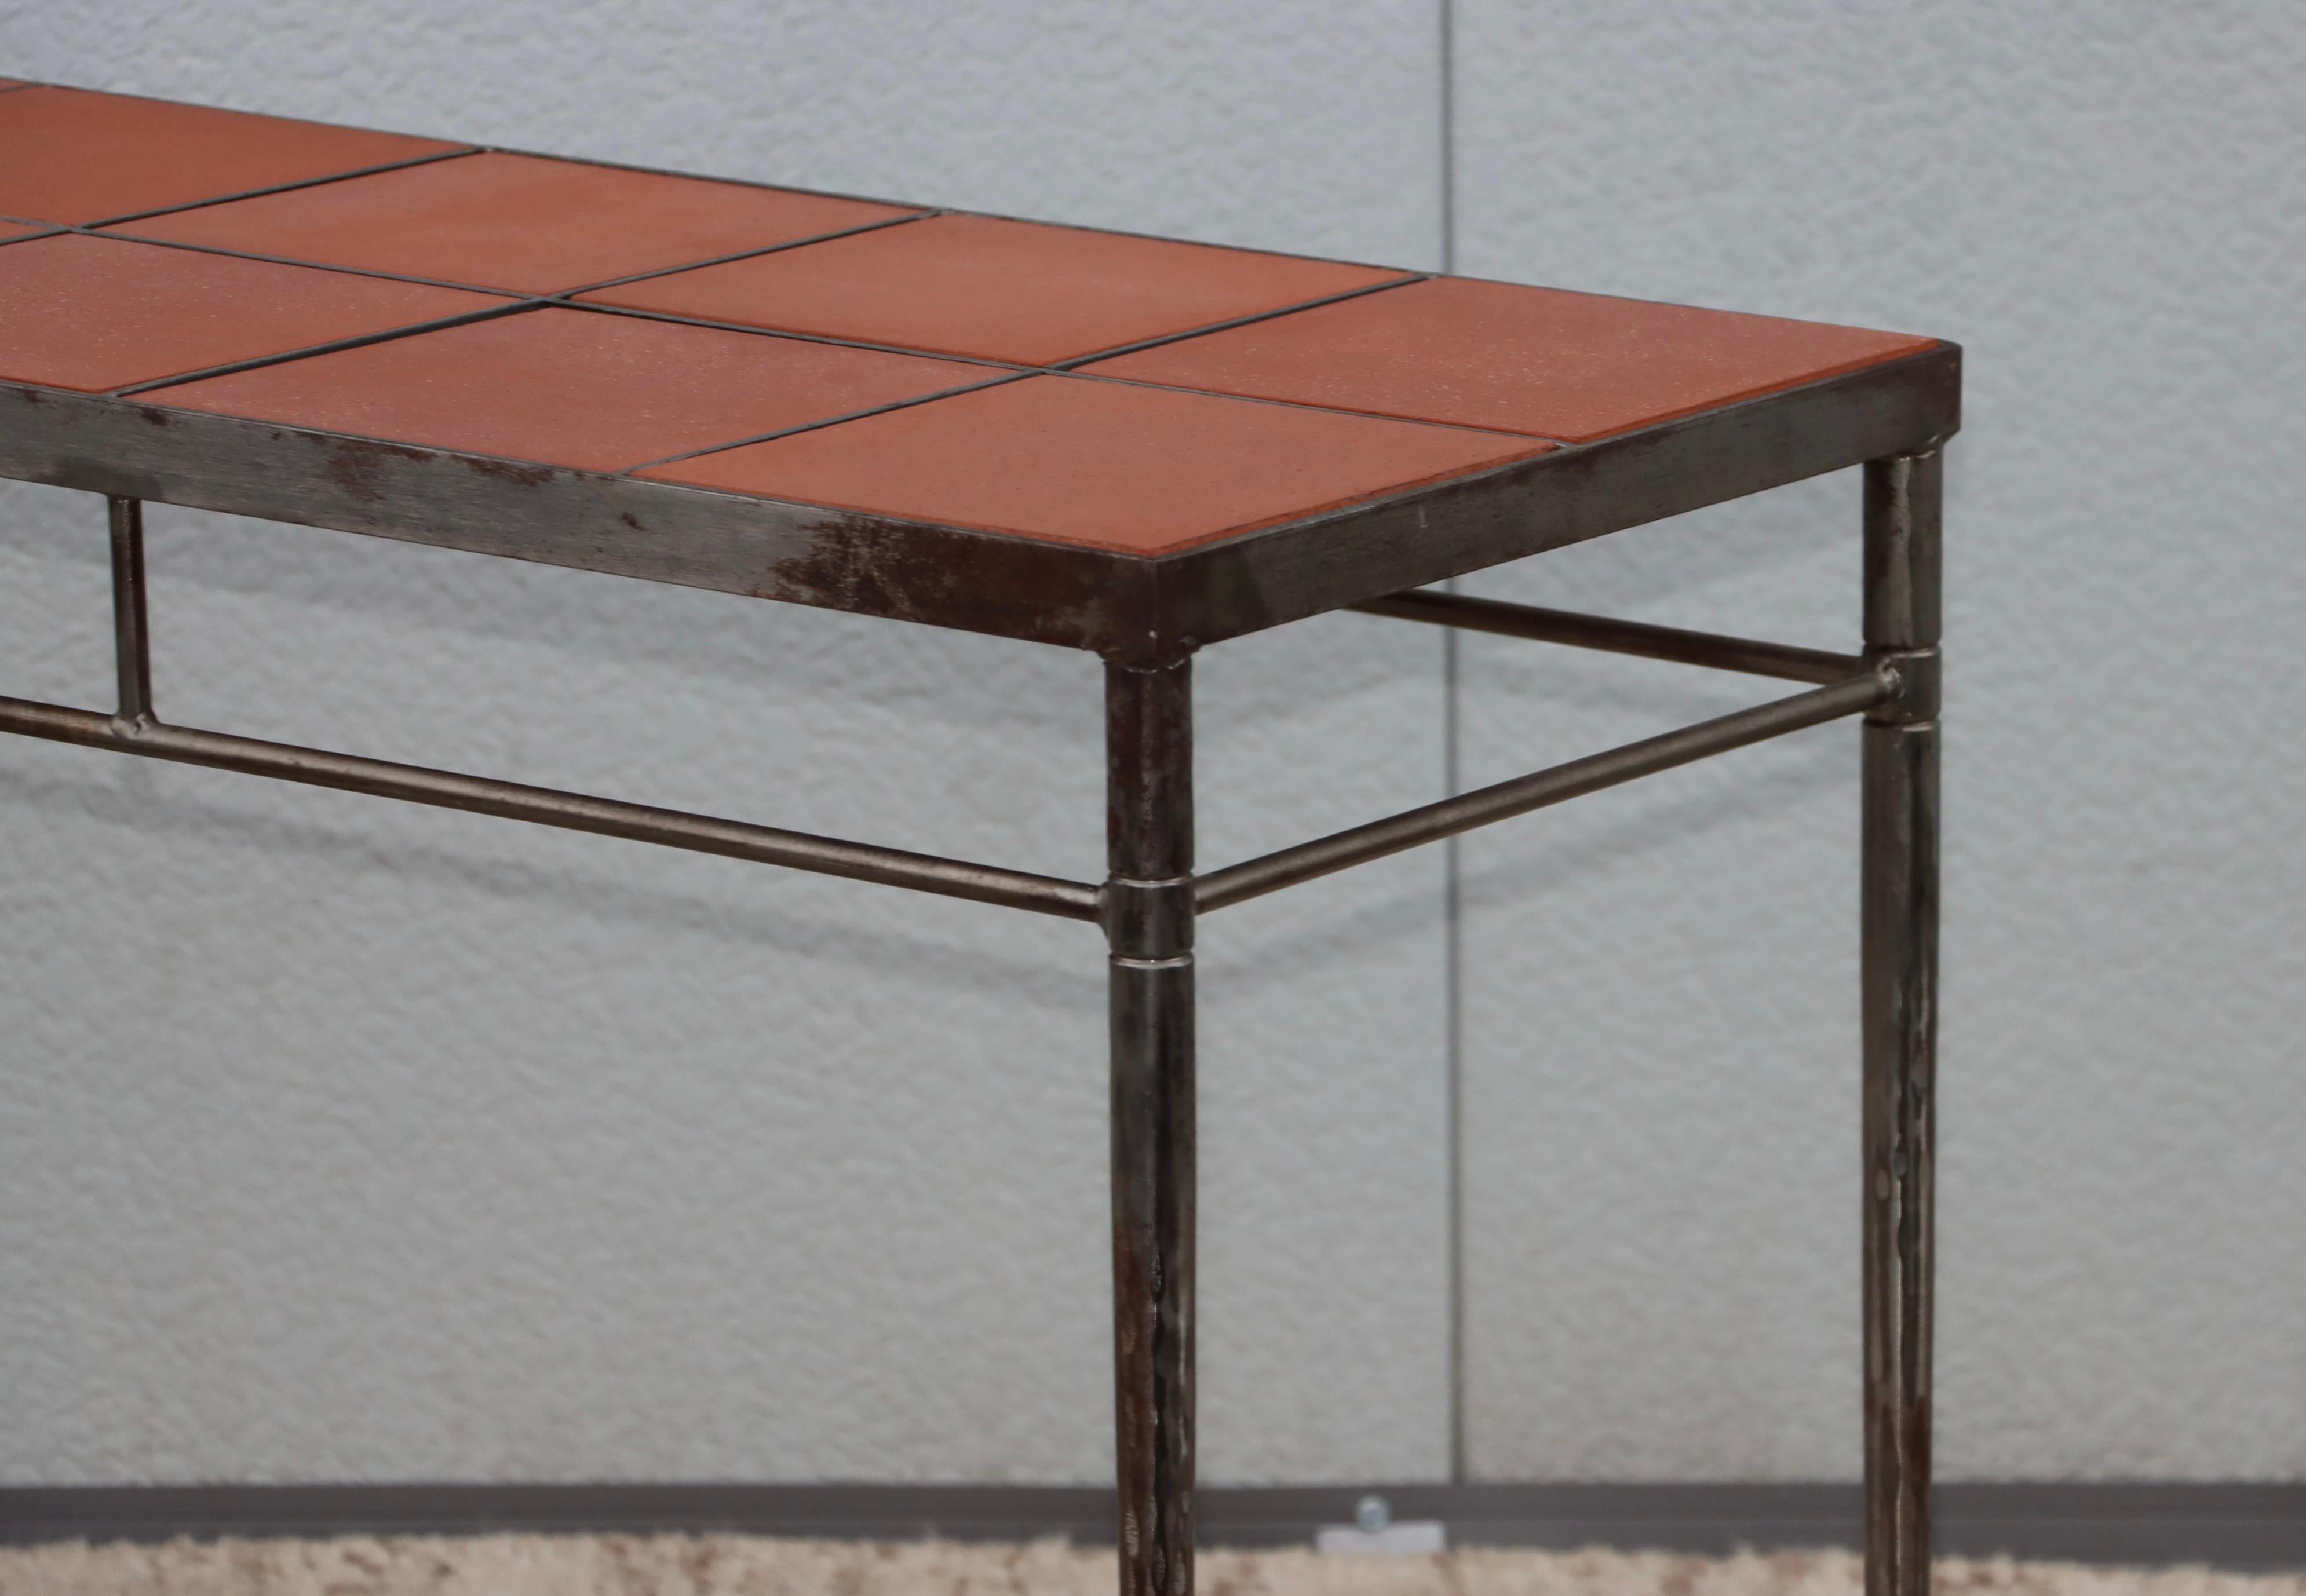 1970's Italian Iron Console Table with Impruneta Terracotta Tile Inserts For Sale 3